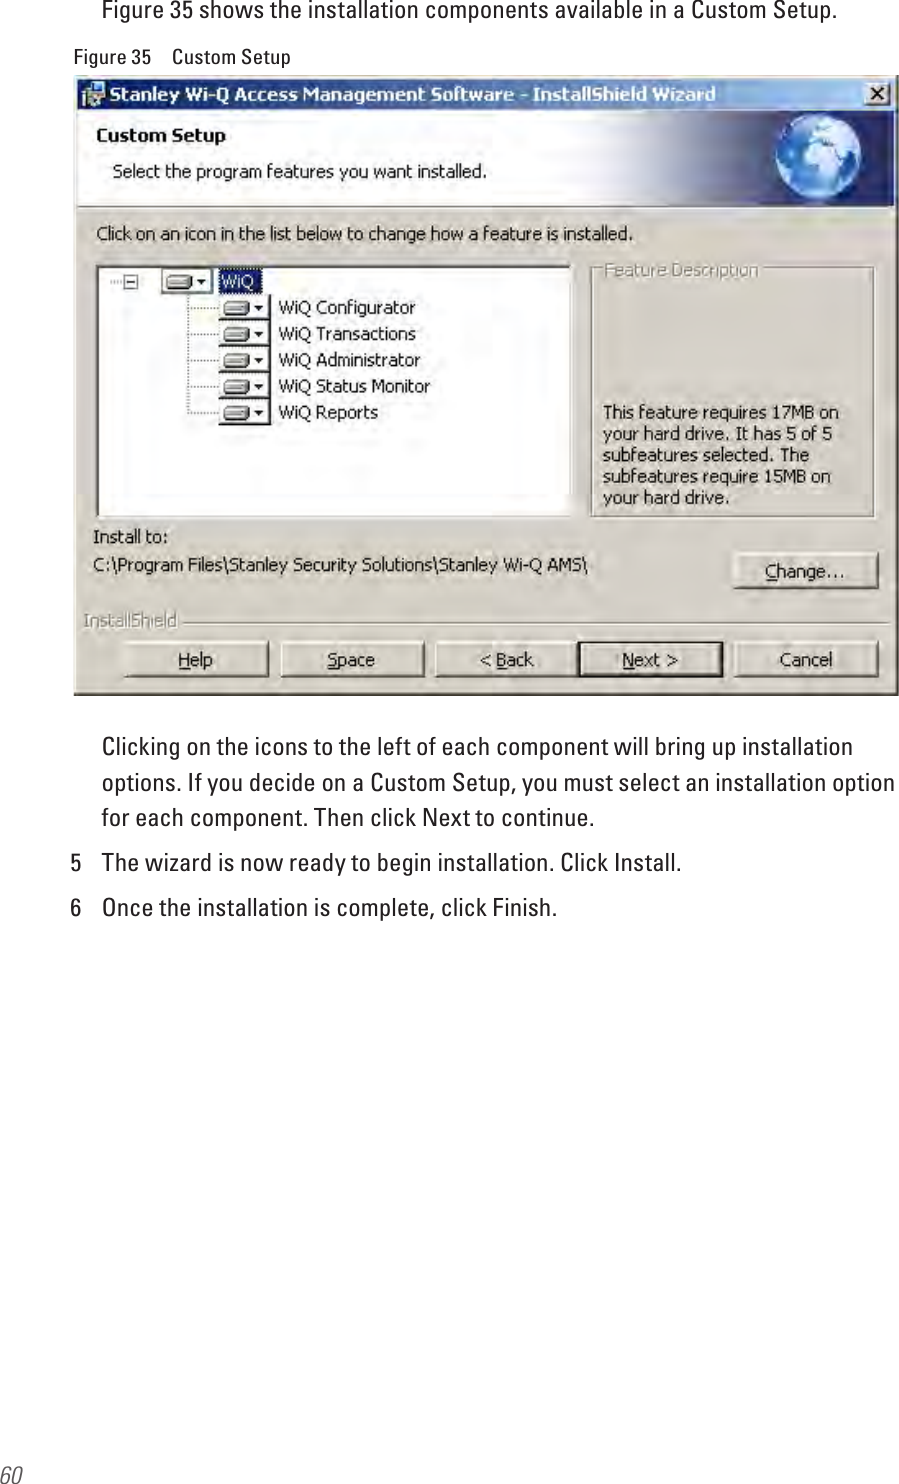 60Figure 35 shows the installation components available in a Custom Setup.Figure 35  Custom SetupClicking on the icons to the left of each component will bring up installation options. If you decide on a Custom Setup, you must select an installation option for each component. Then click Next to continue.5  The wizard is now ready to begin installation. Click Install.6  Once the installation is complete, click Finish.